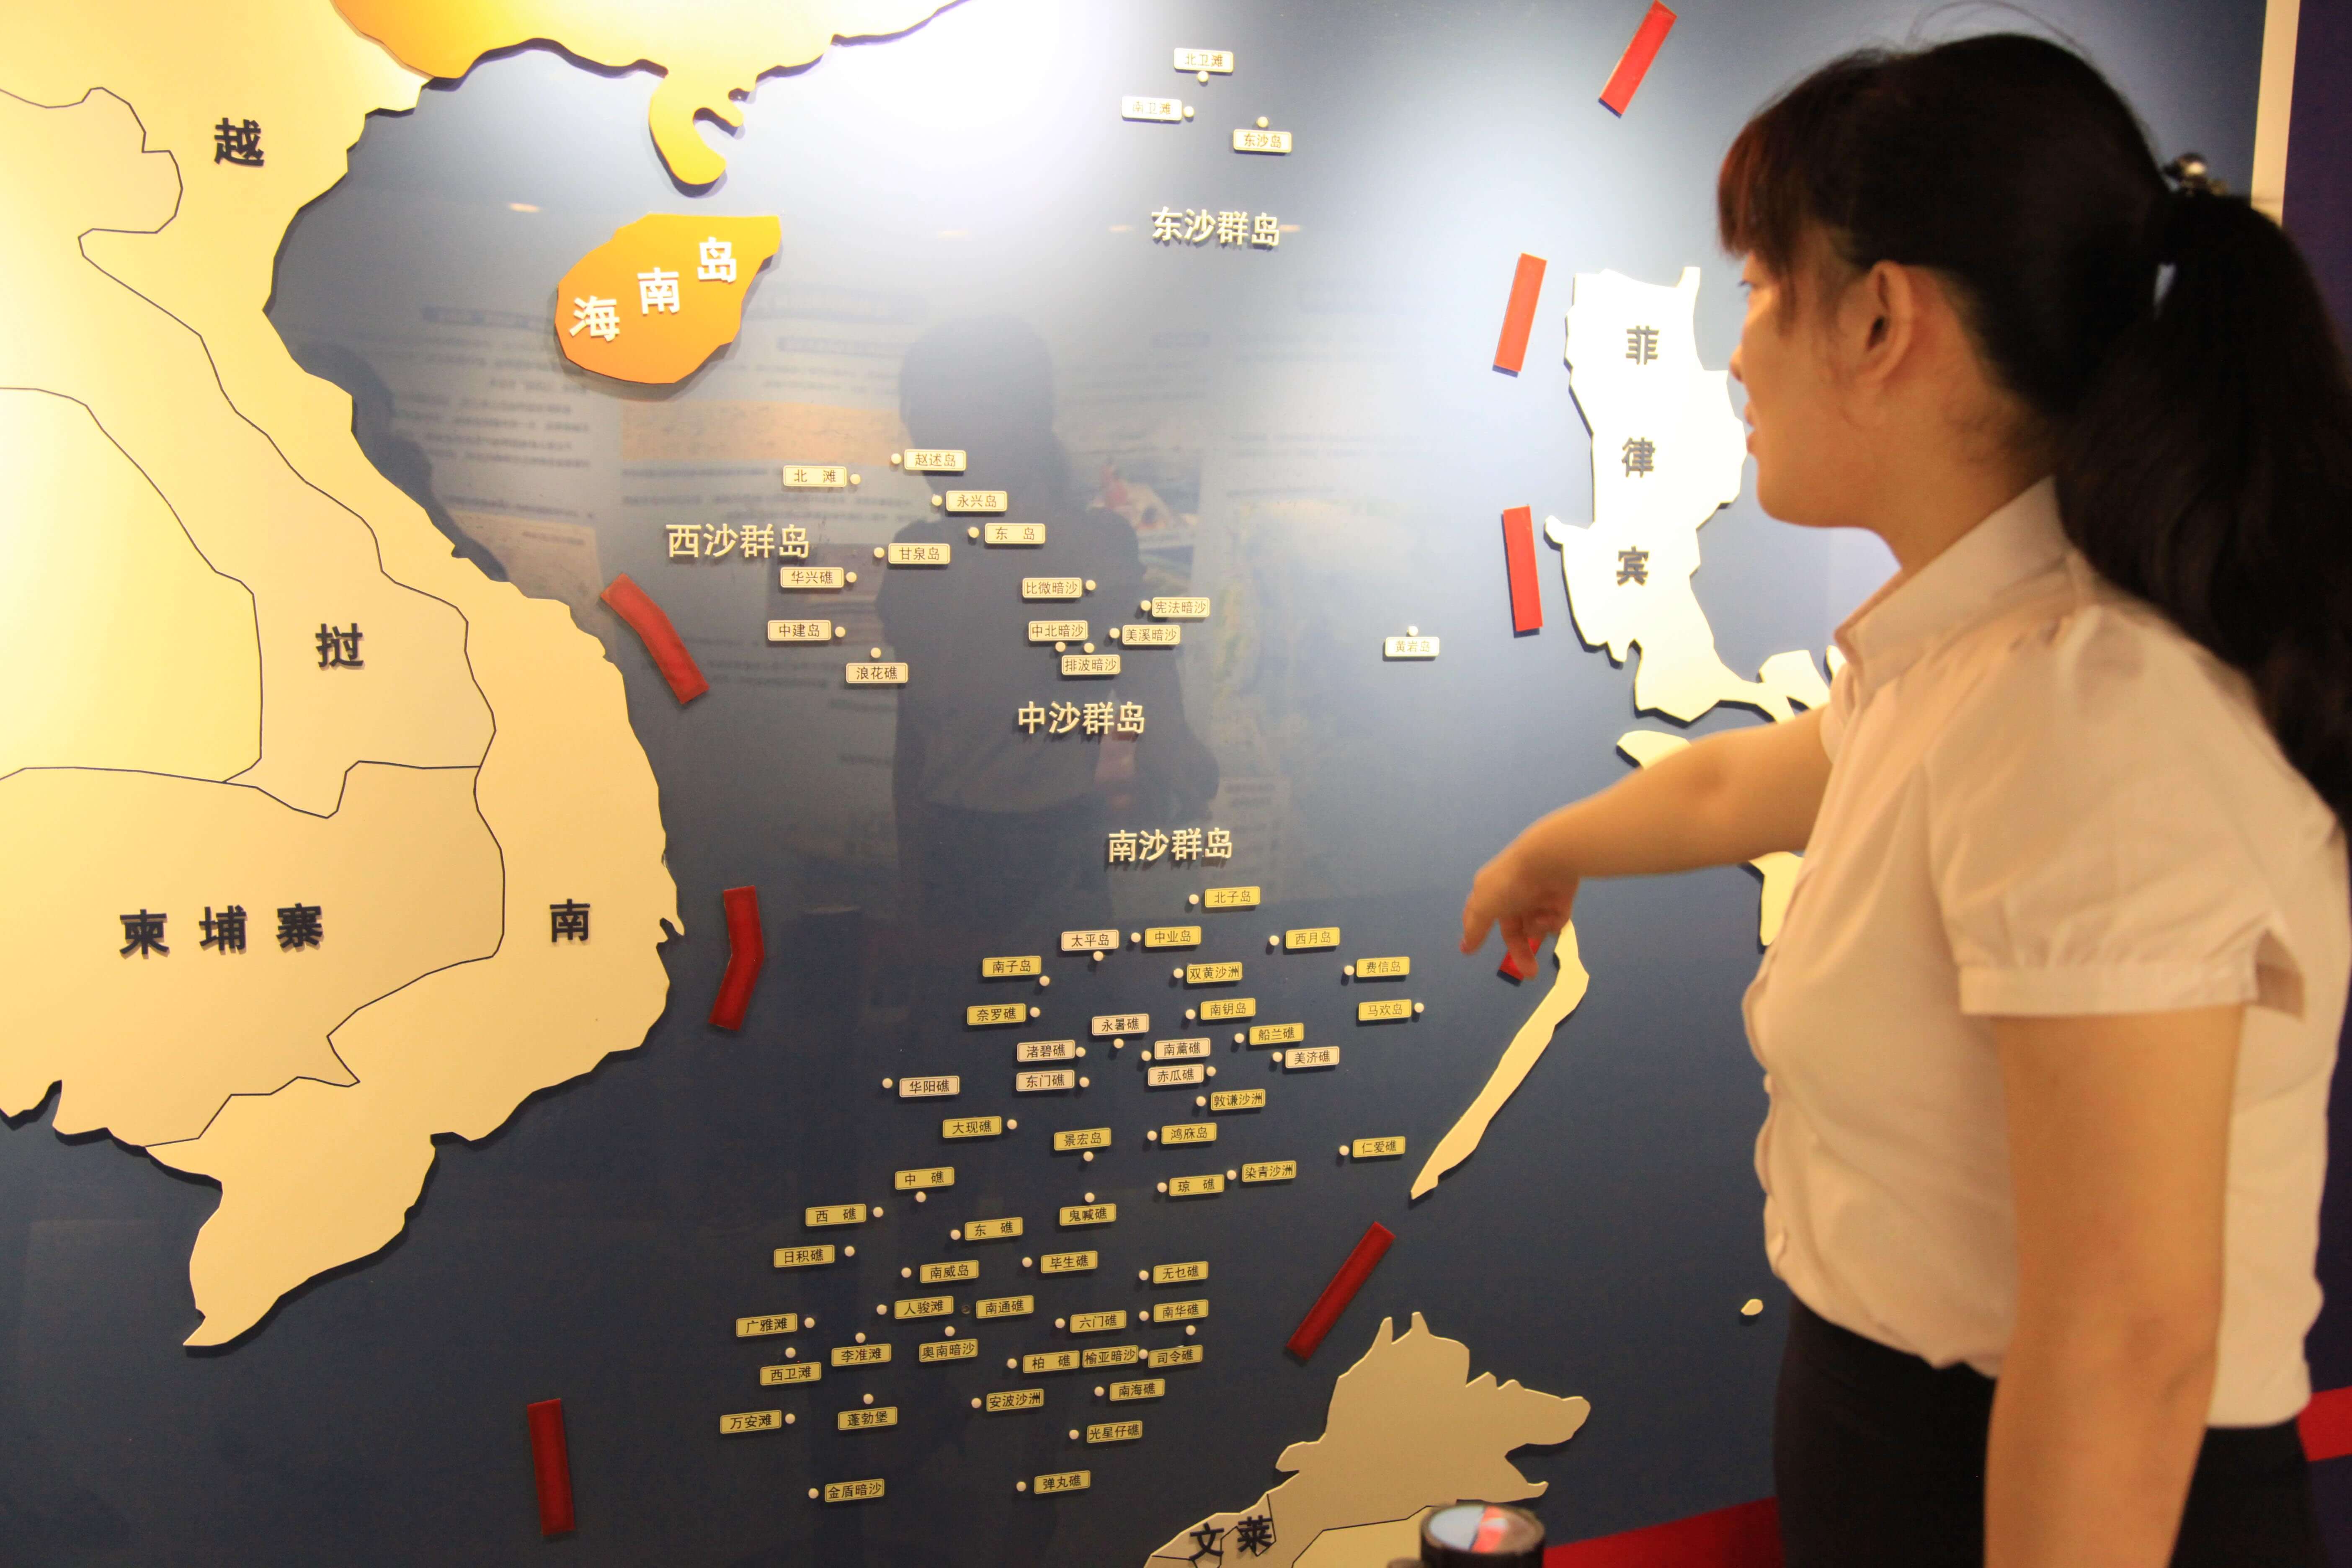 A Chinese visitor looks at a map of the South China Sea and Nansha Islands at a national defence education center in Nanjing city, east China's Jiangsu province, 12 July 2016